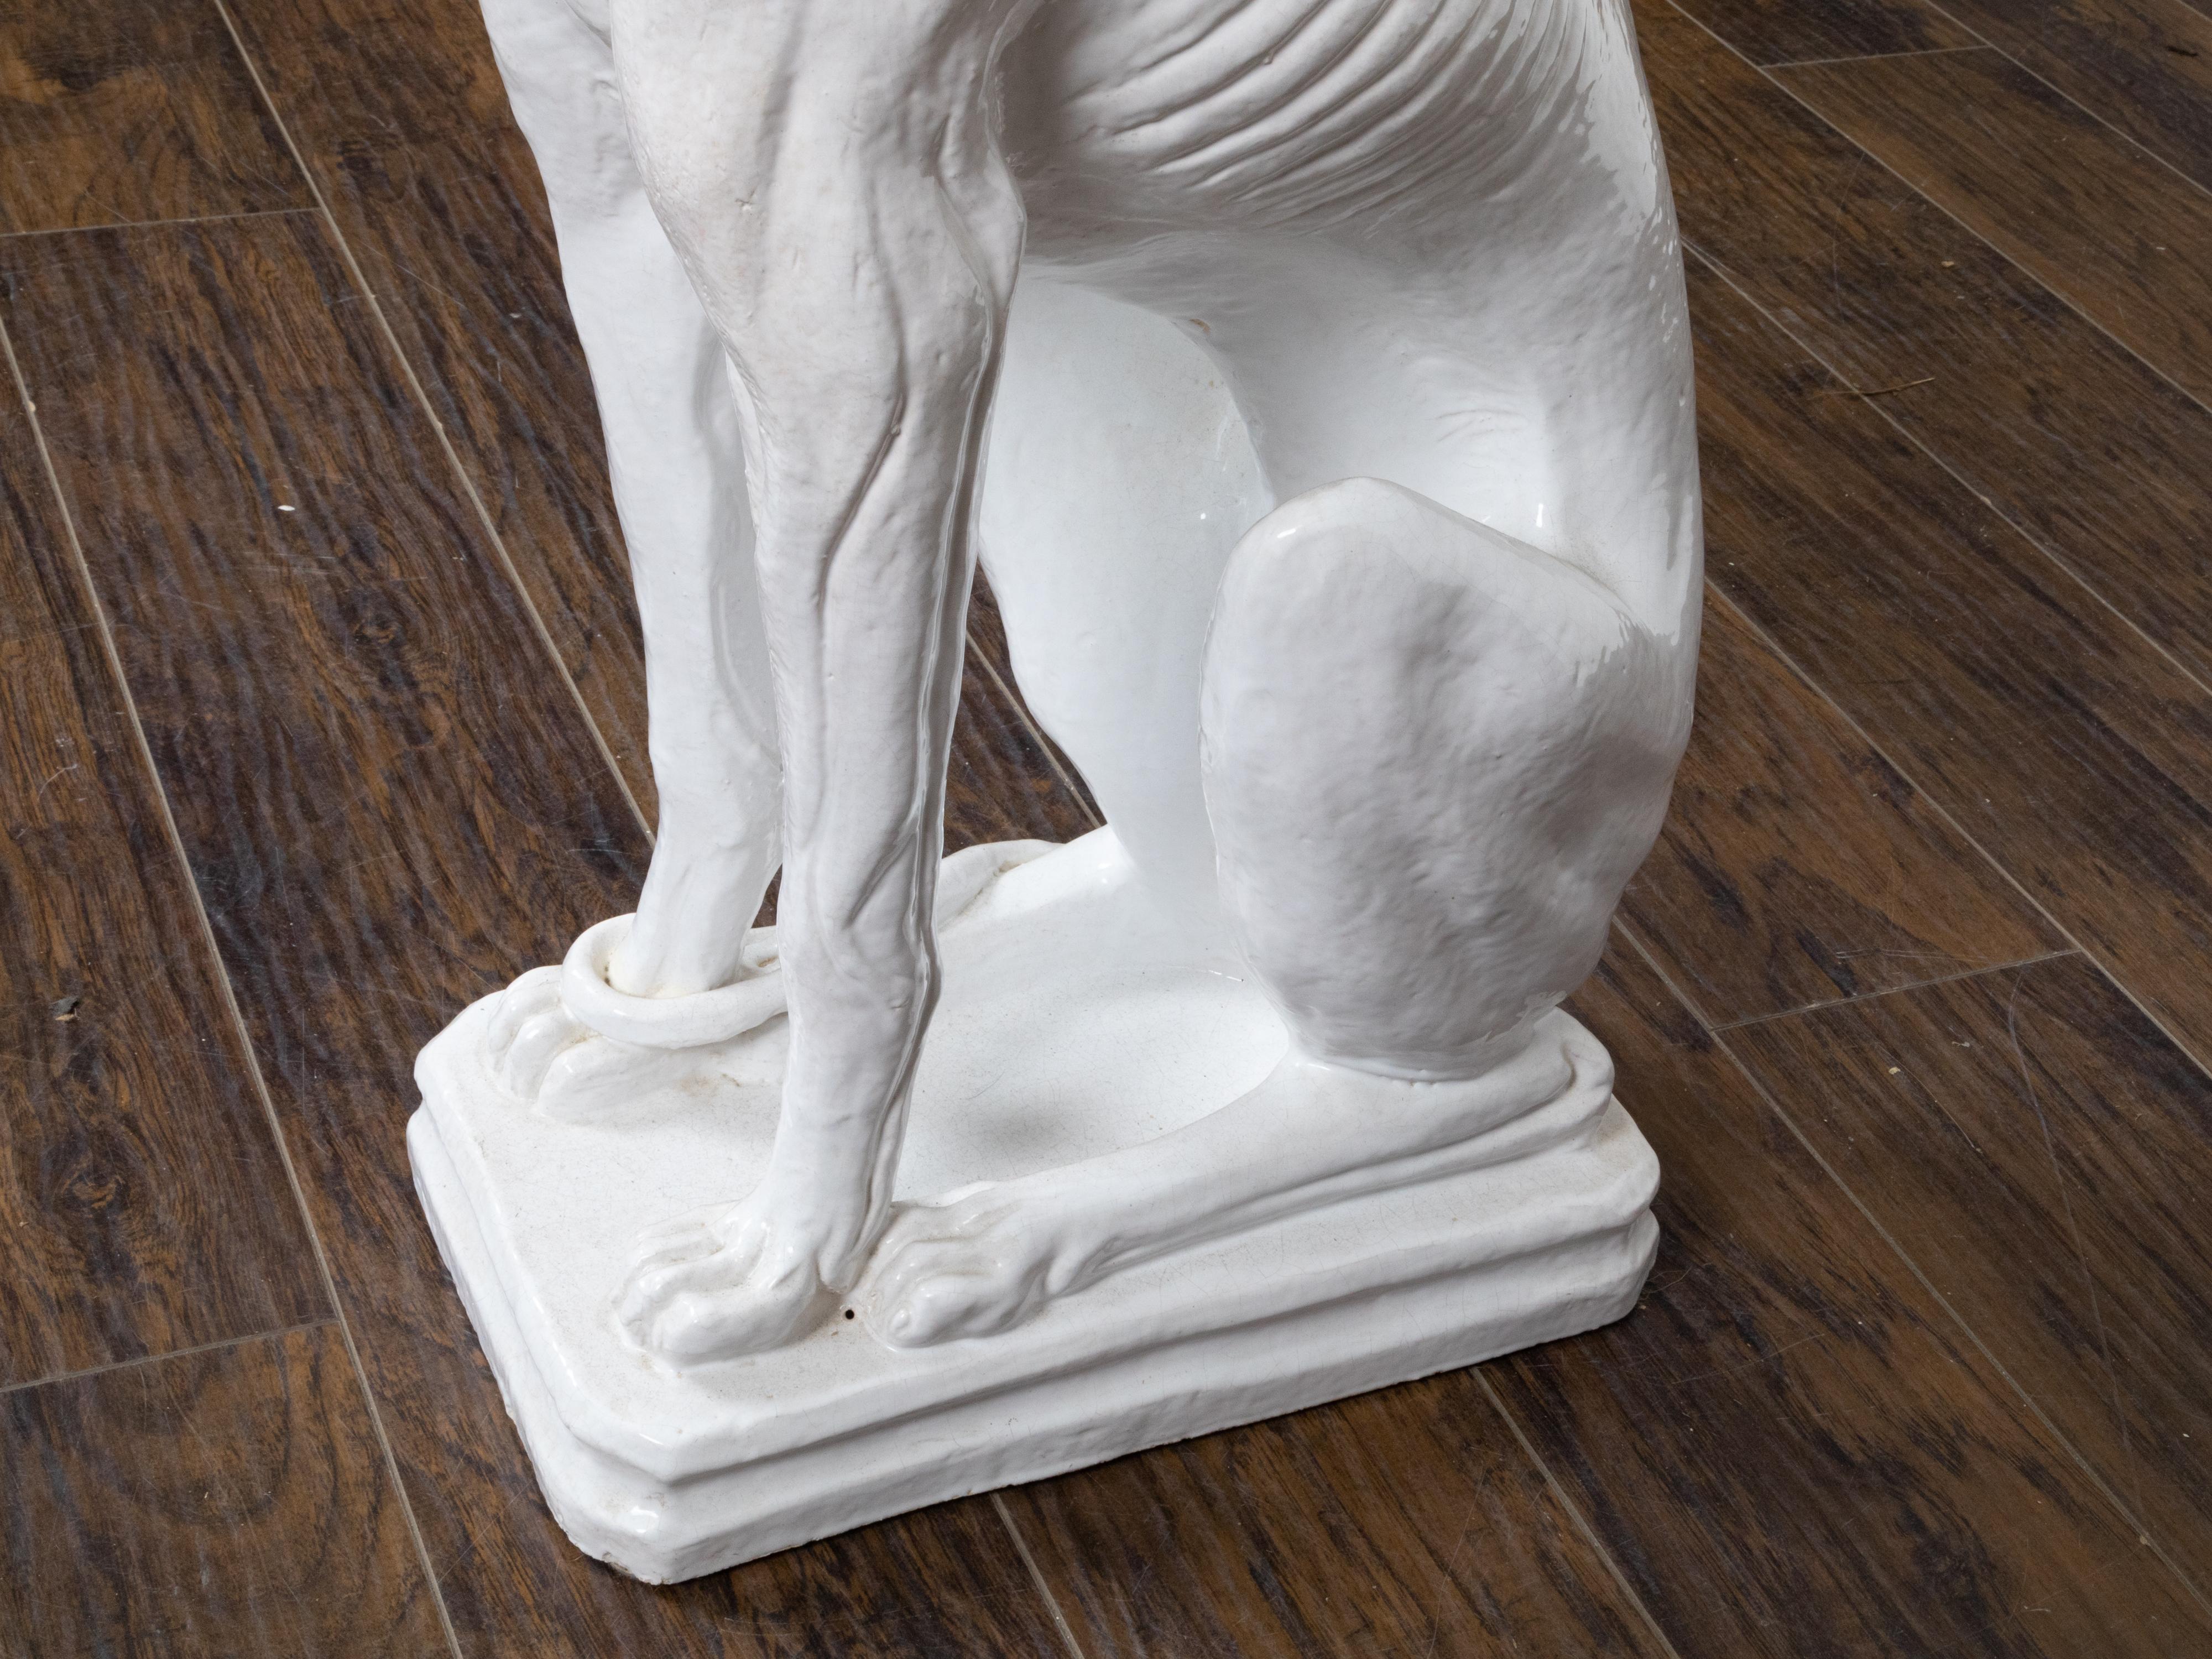 20th Century Midcentury Italian White Porcelain Sculpture of a Calm, Sitting Greyhound For Sale